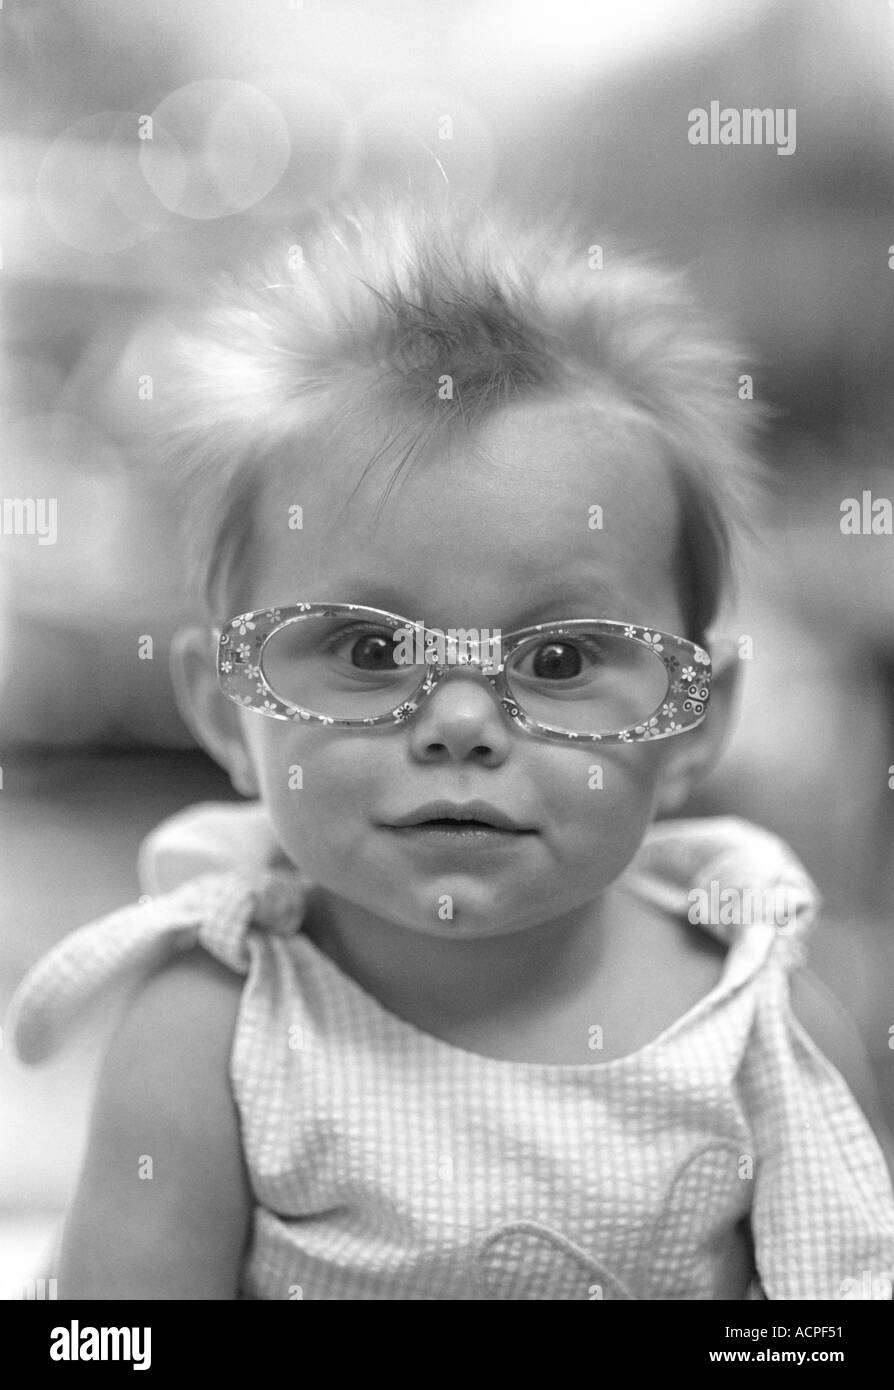 Cute baby small girl wearing funny glasses smiling Stock Photo